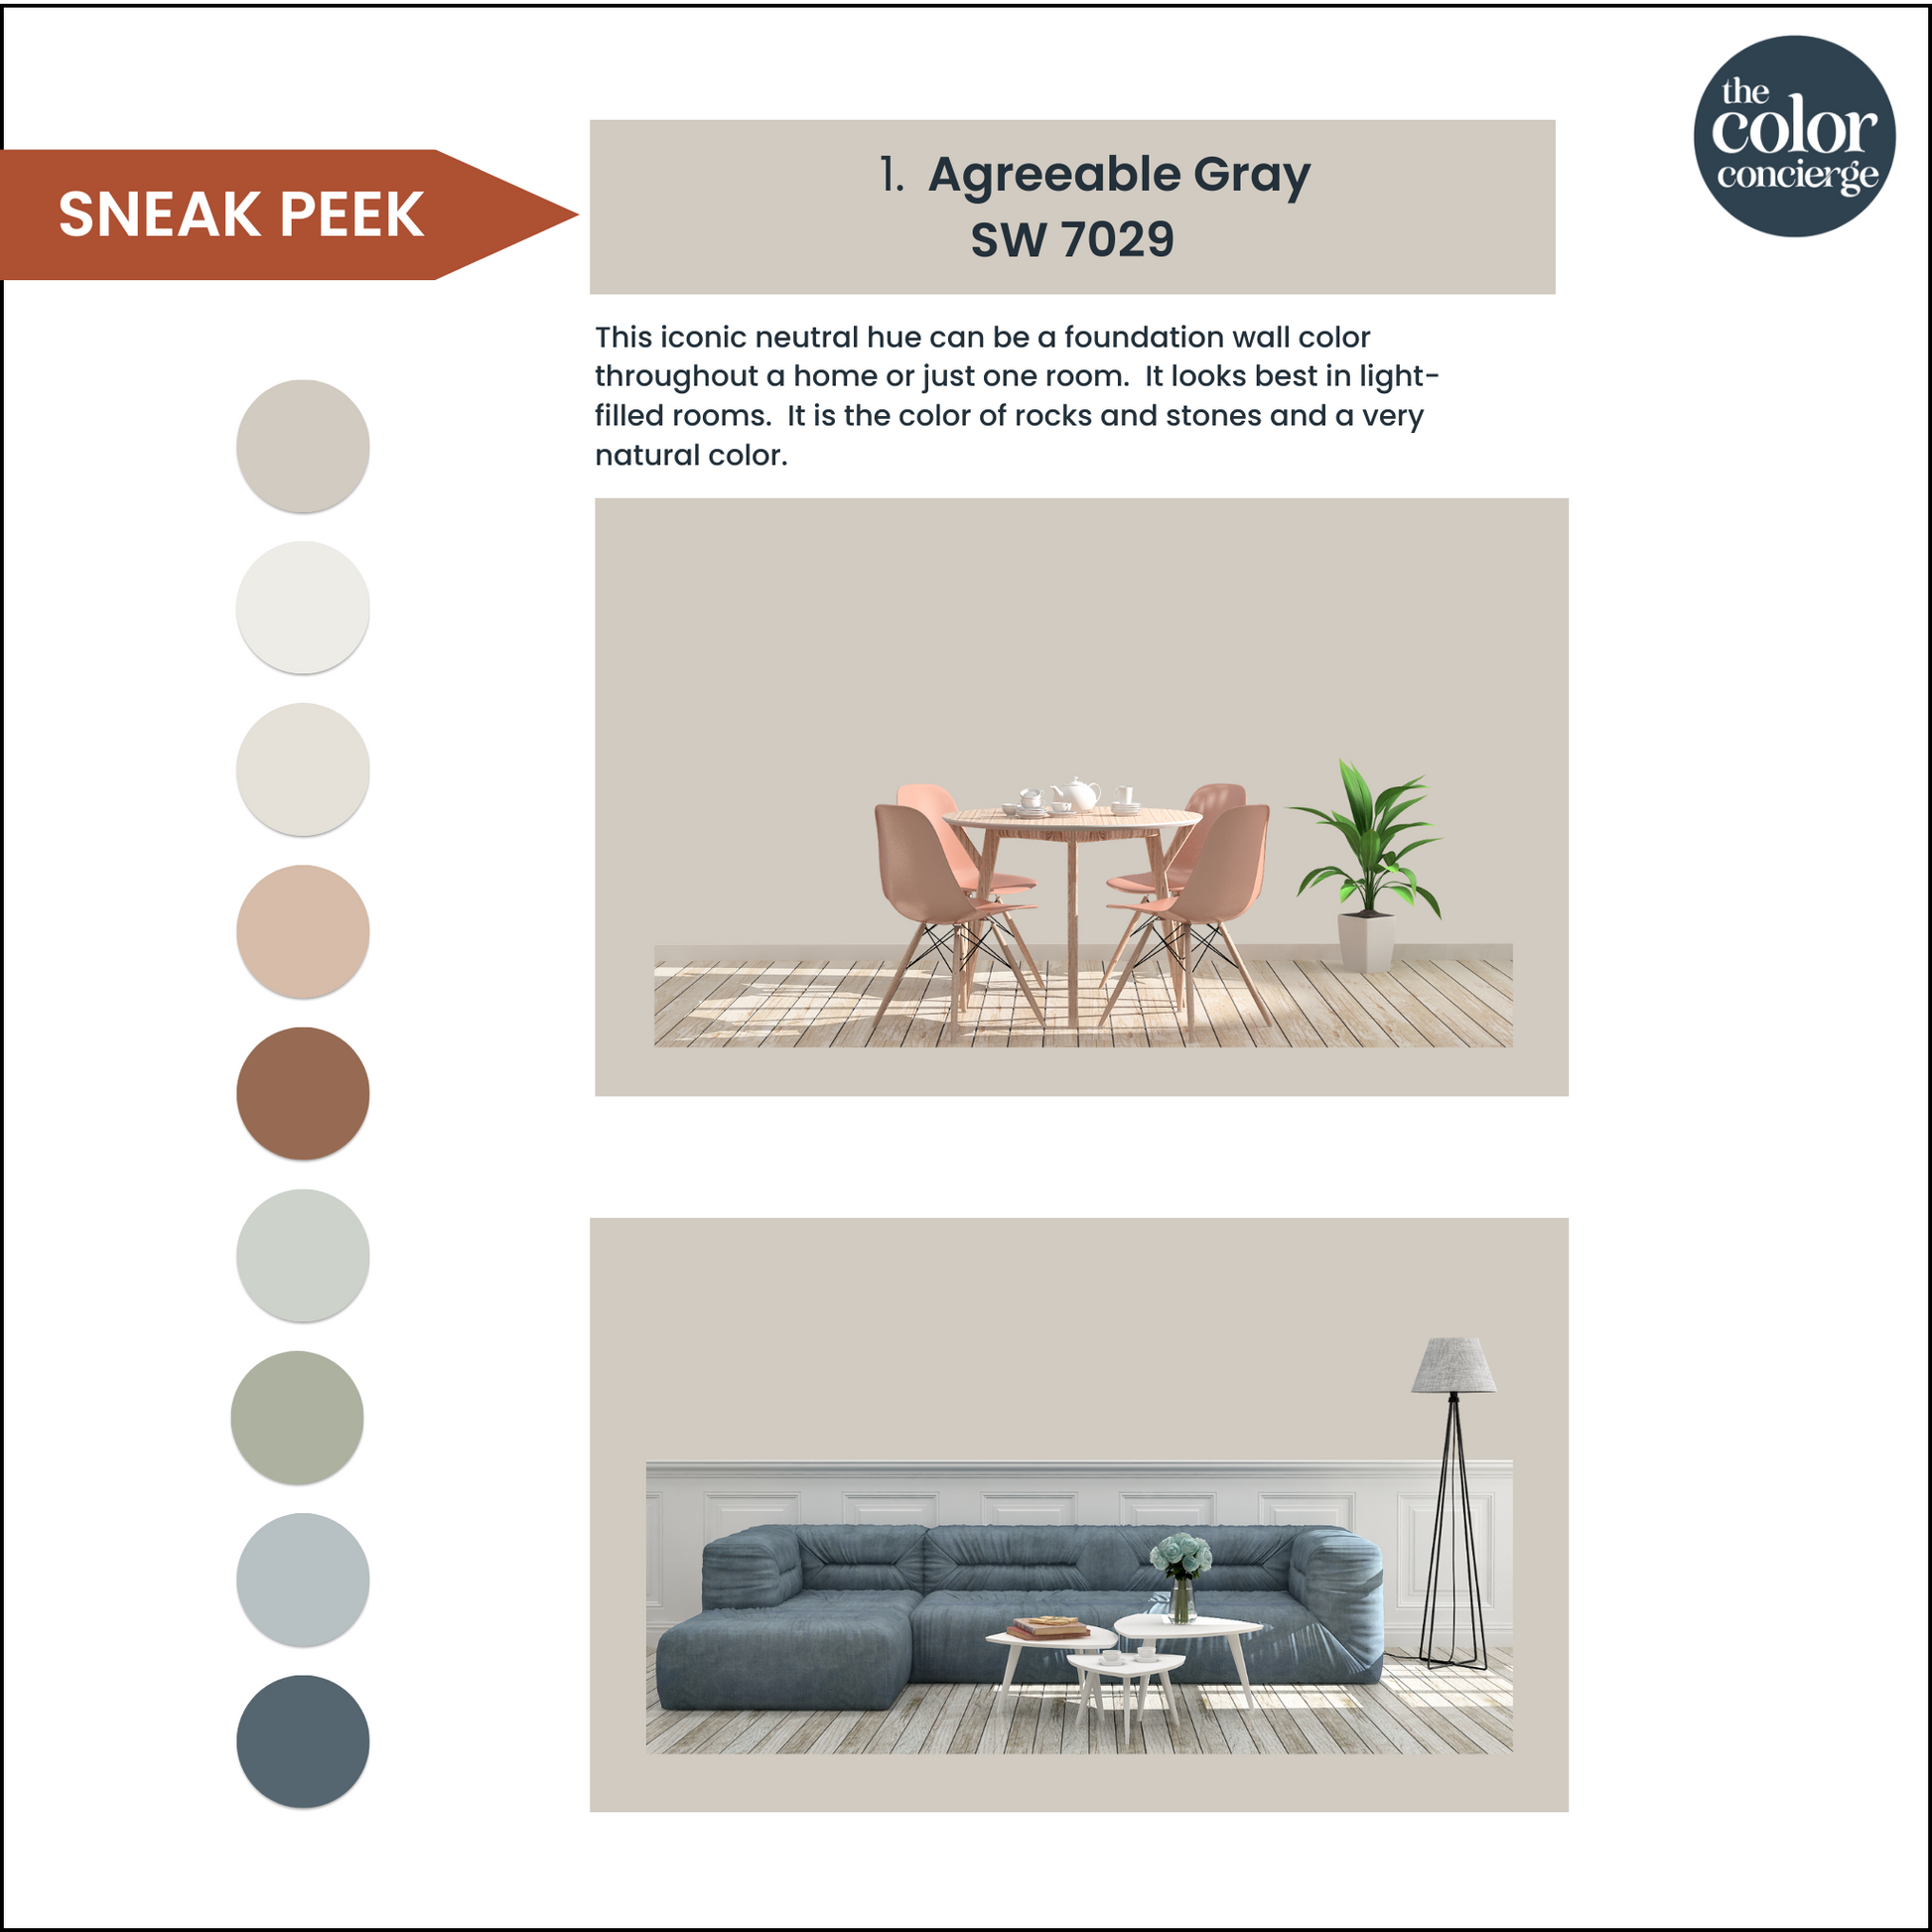 A page showing how to use a Sherwin-Williams Agreeable Gray color palette in your home